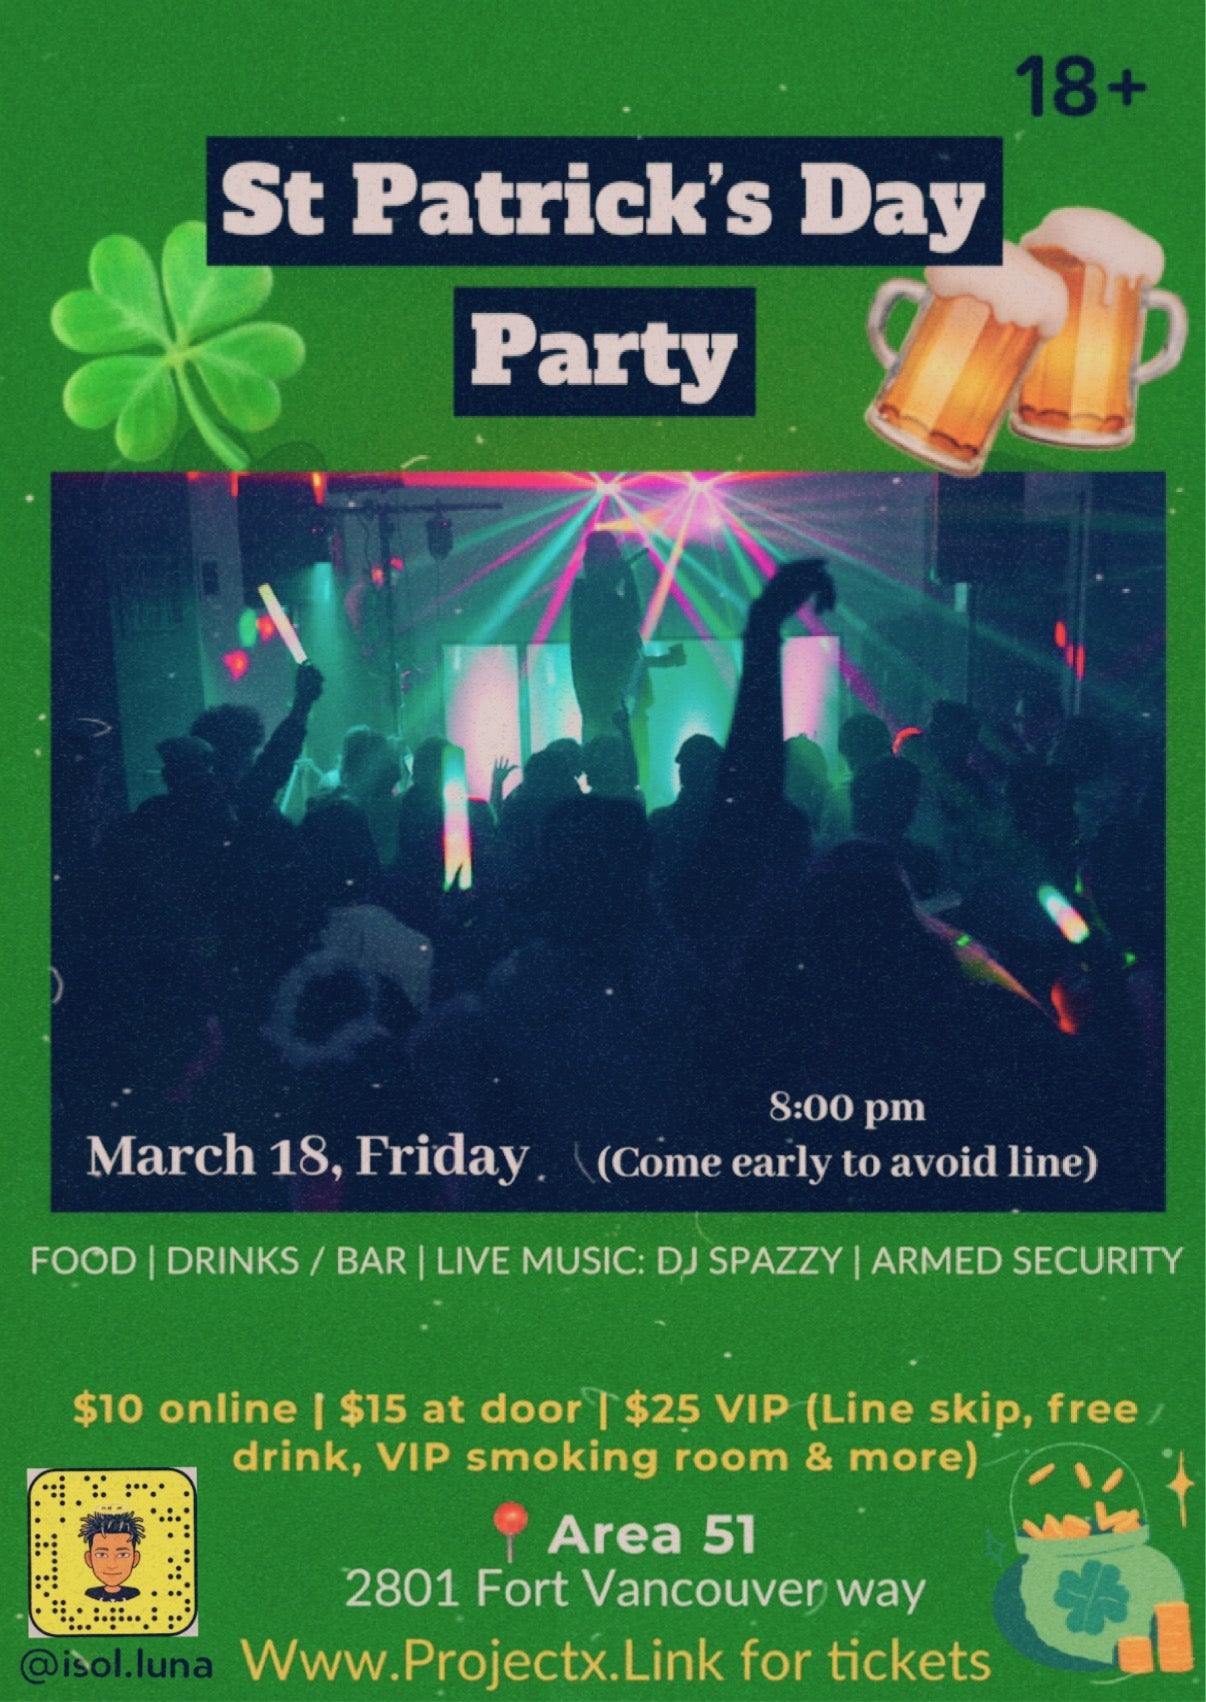 St Patrick’s Day Party General Admission